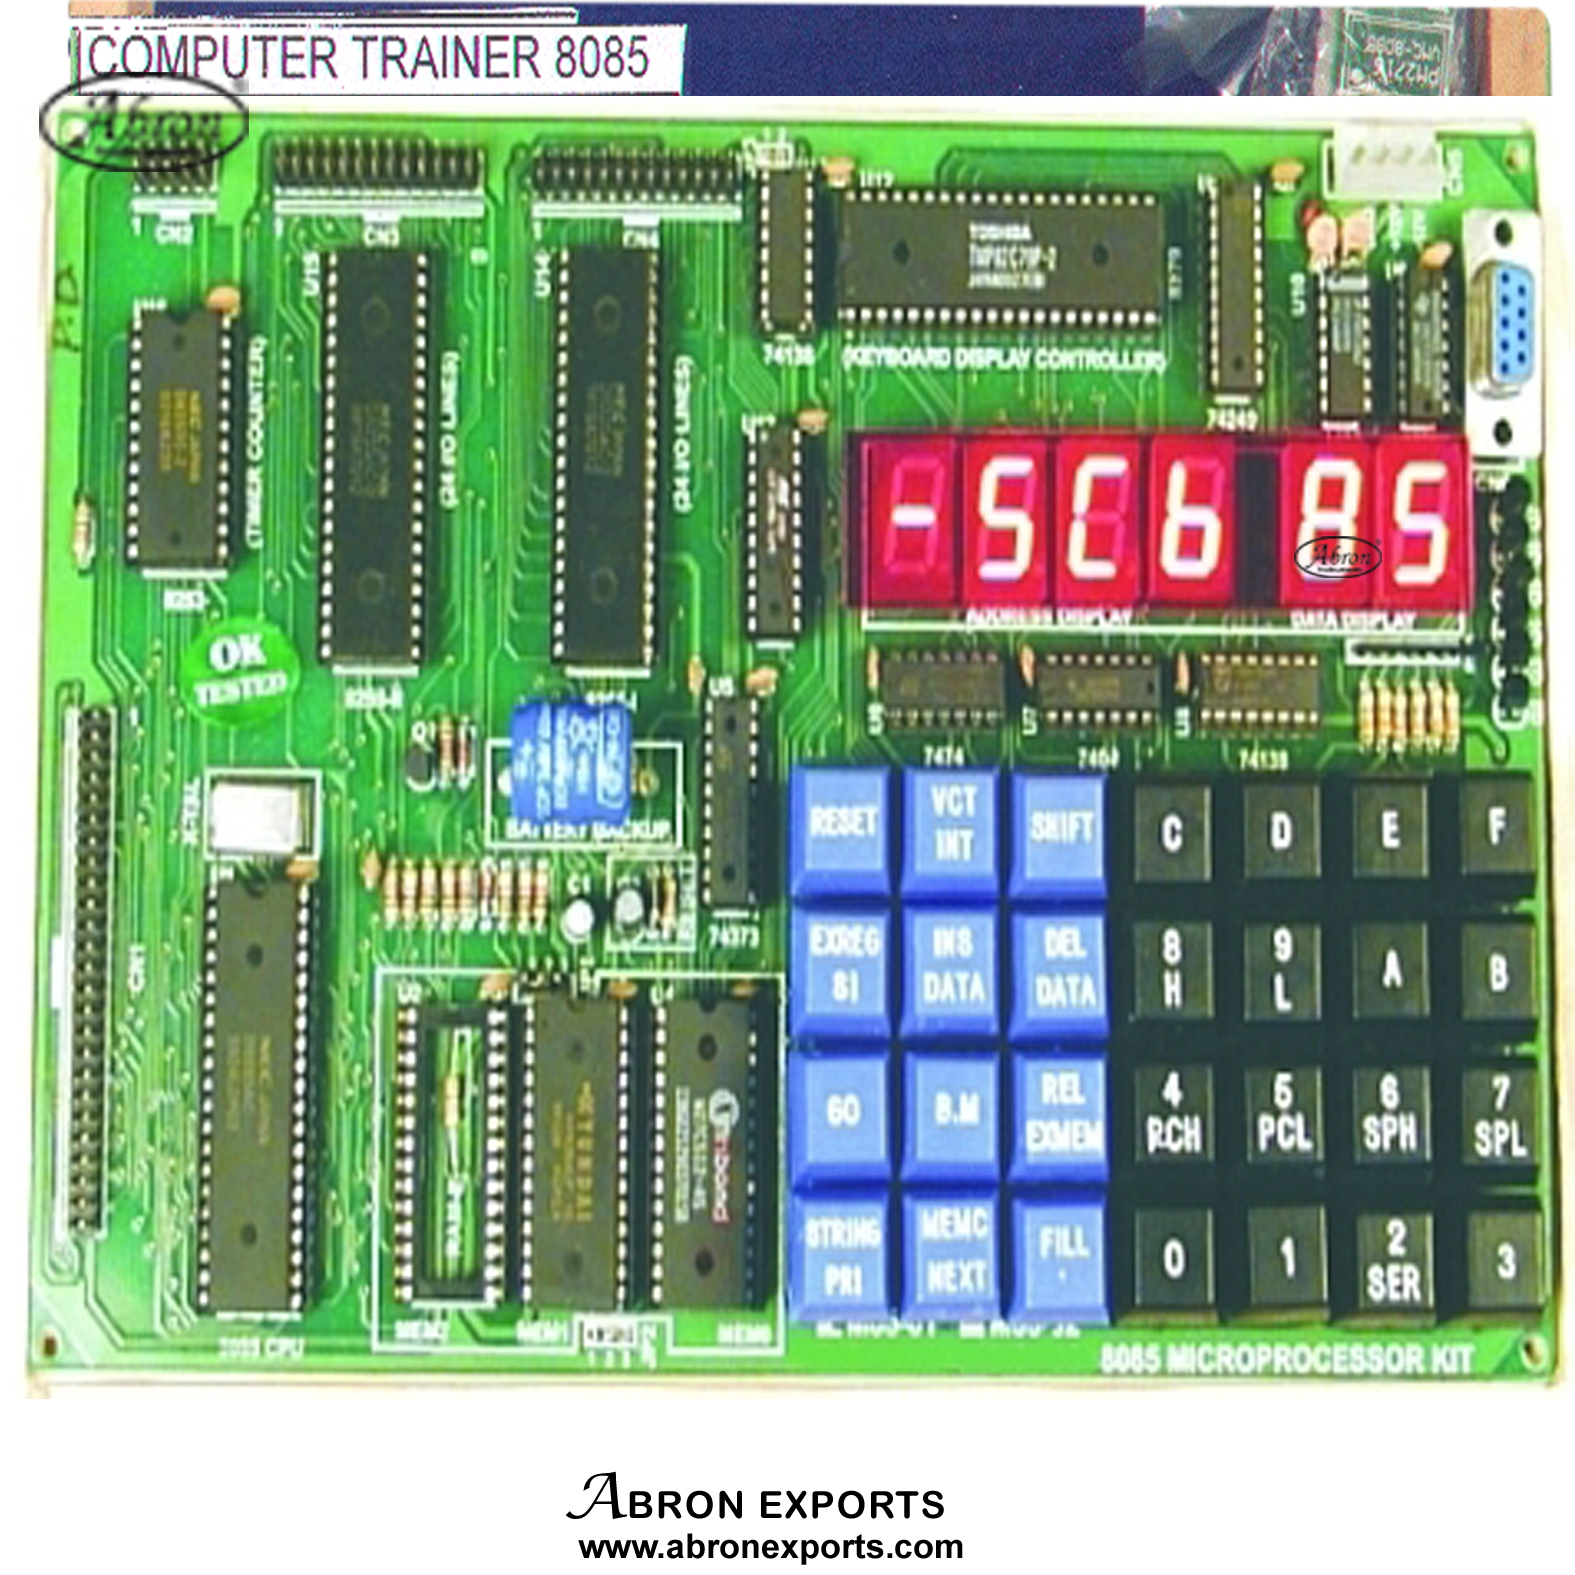 8 Microprocessor Computer Trainer 8085 CPU 8K Bytes basic with Key Pad LED display power supply AE-1305K  